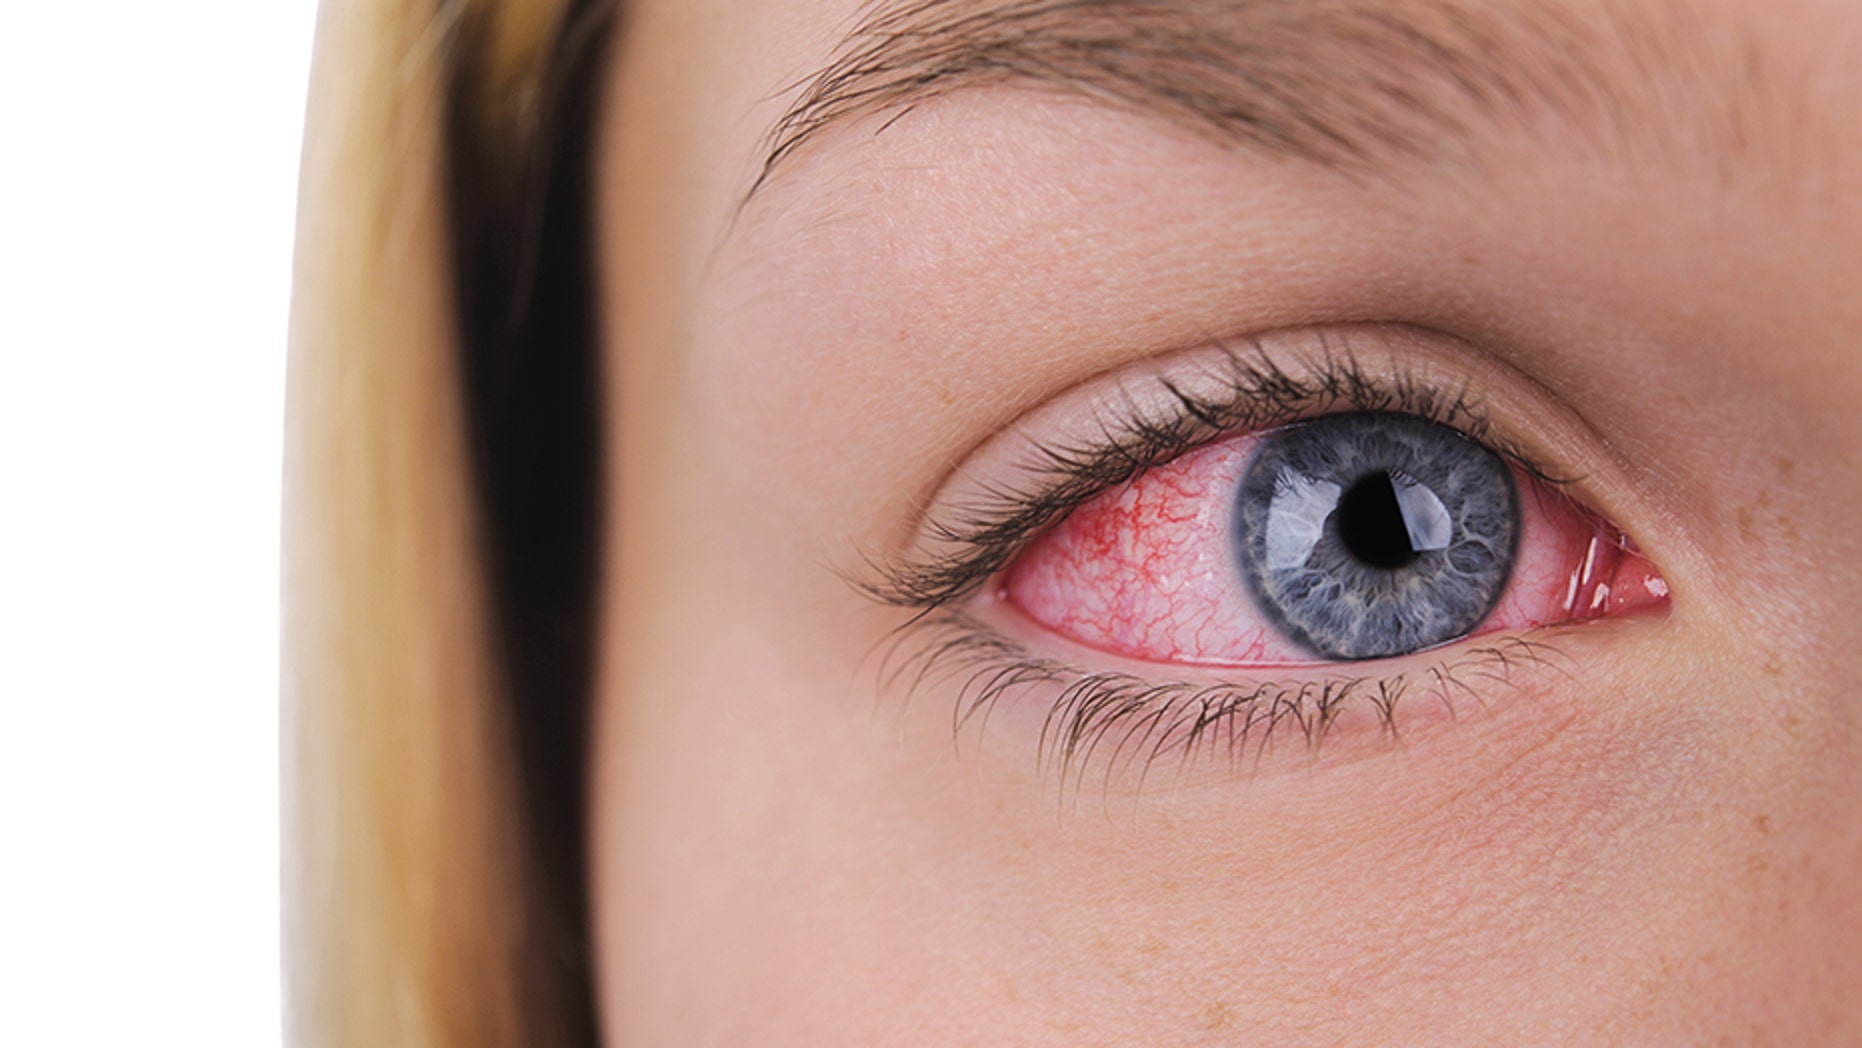 Texas doctor warns 'super strain' of pink eye on rise in part of state